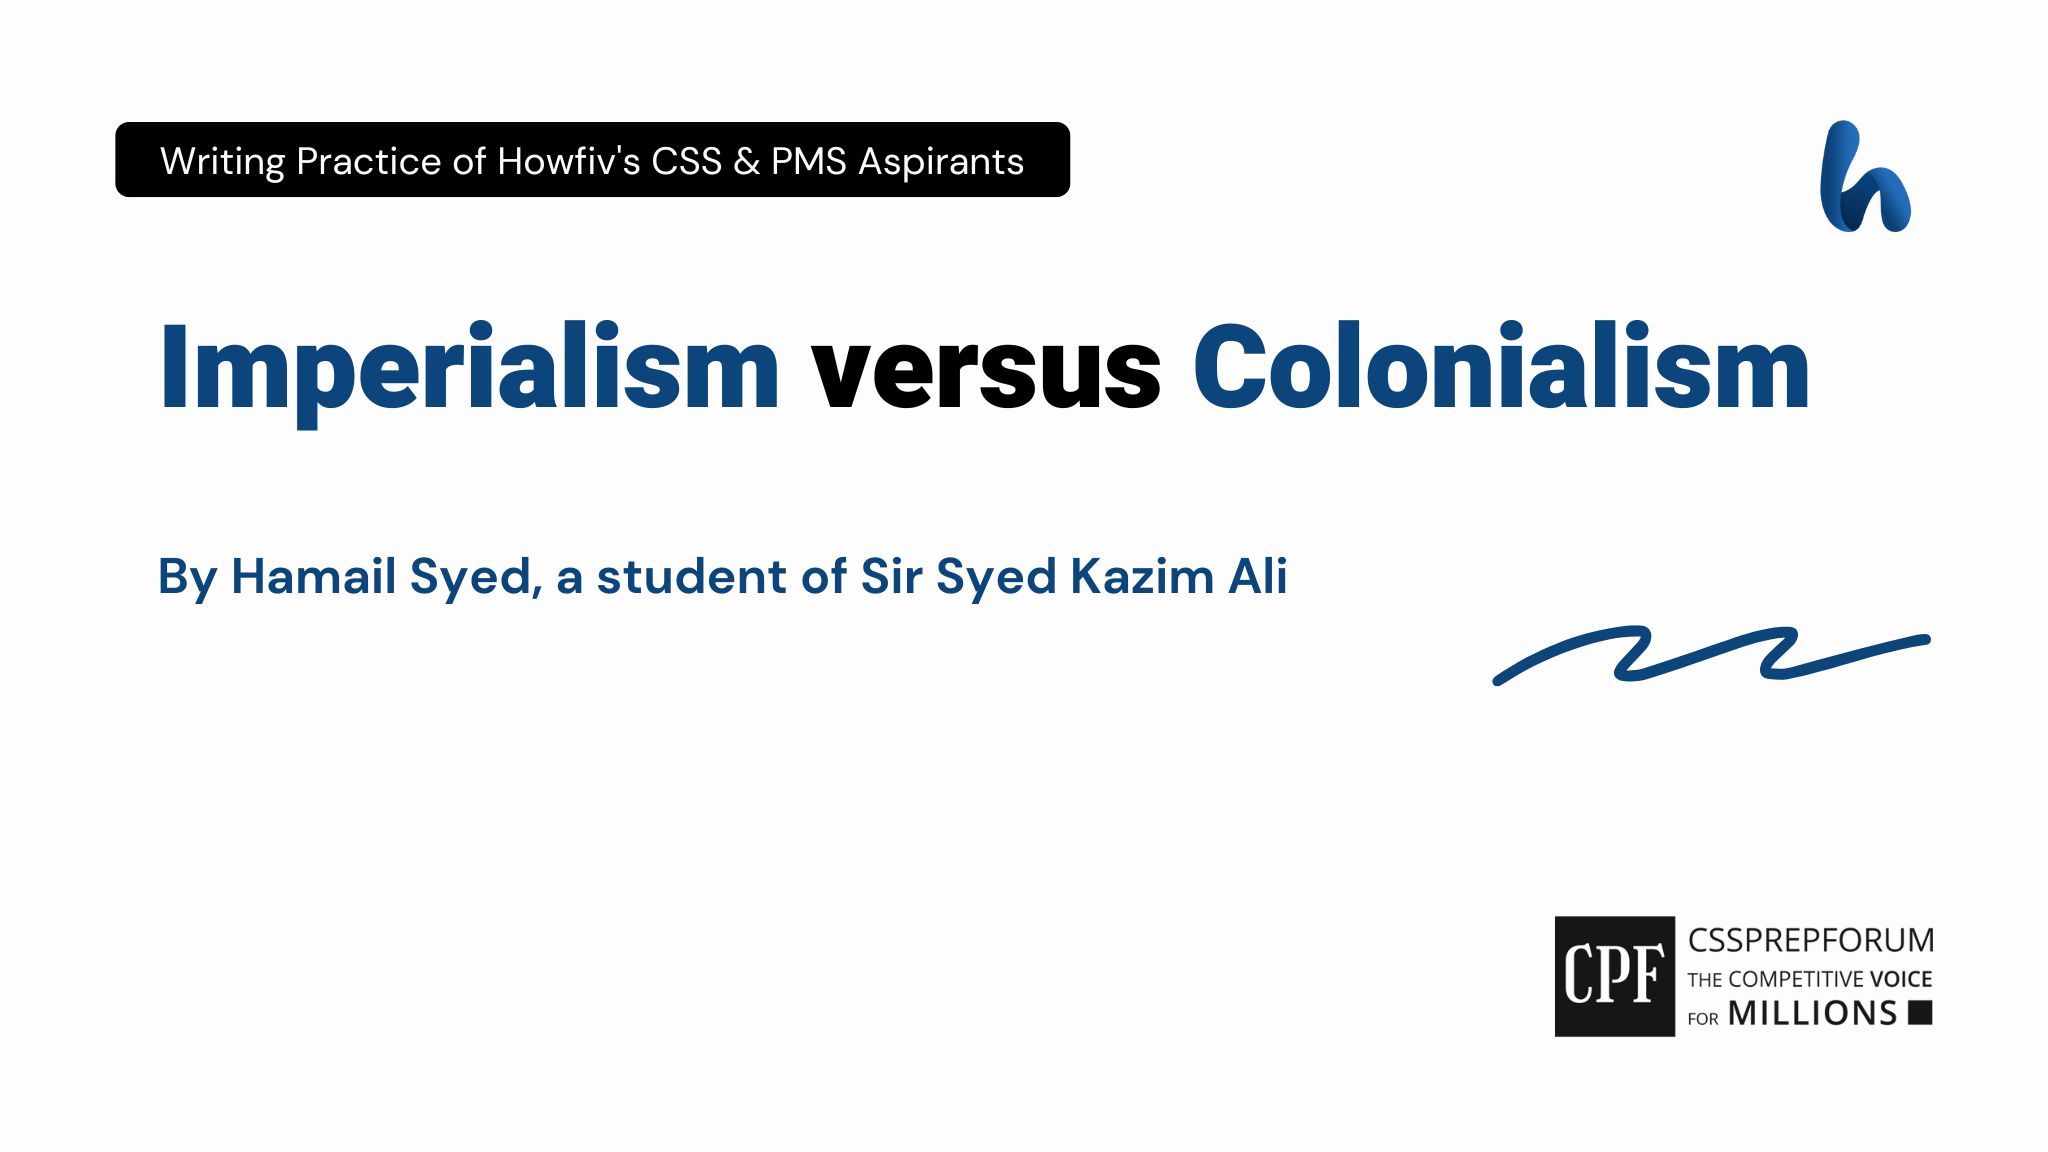 Imperialism versus Colonialism by Hamail Syed